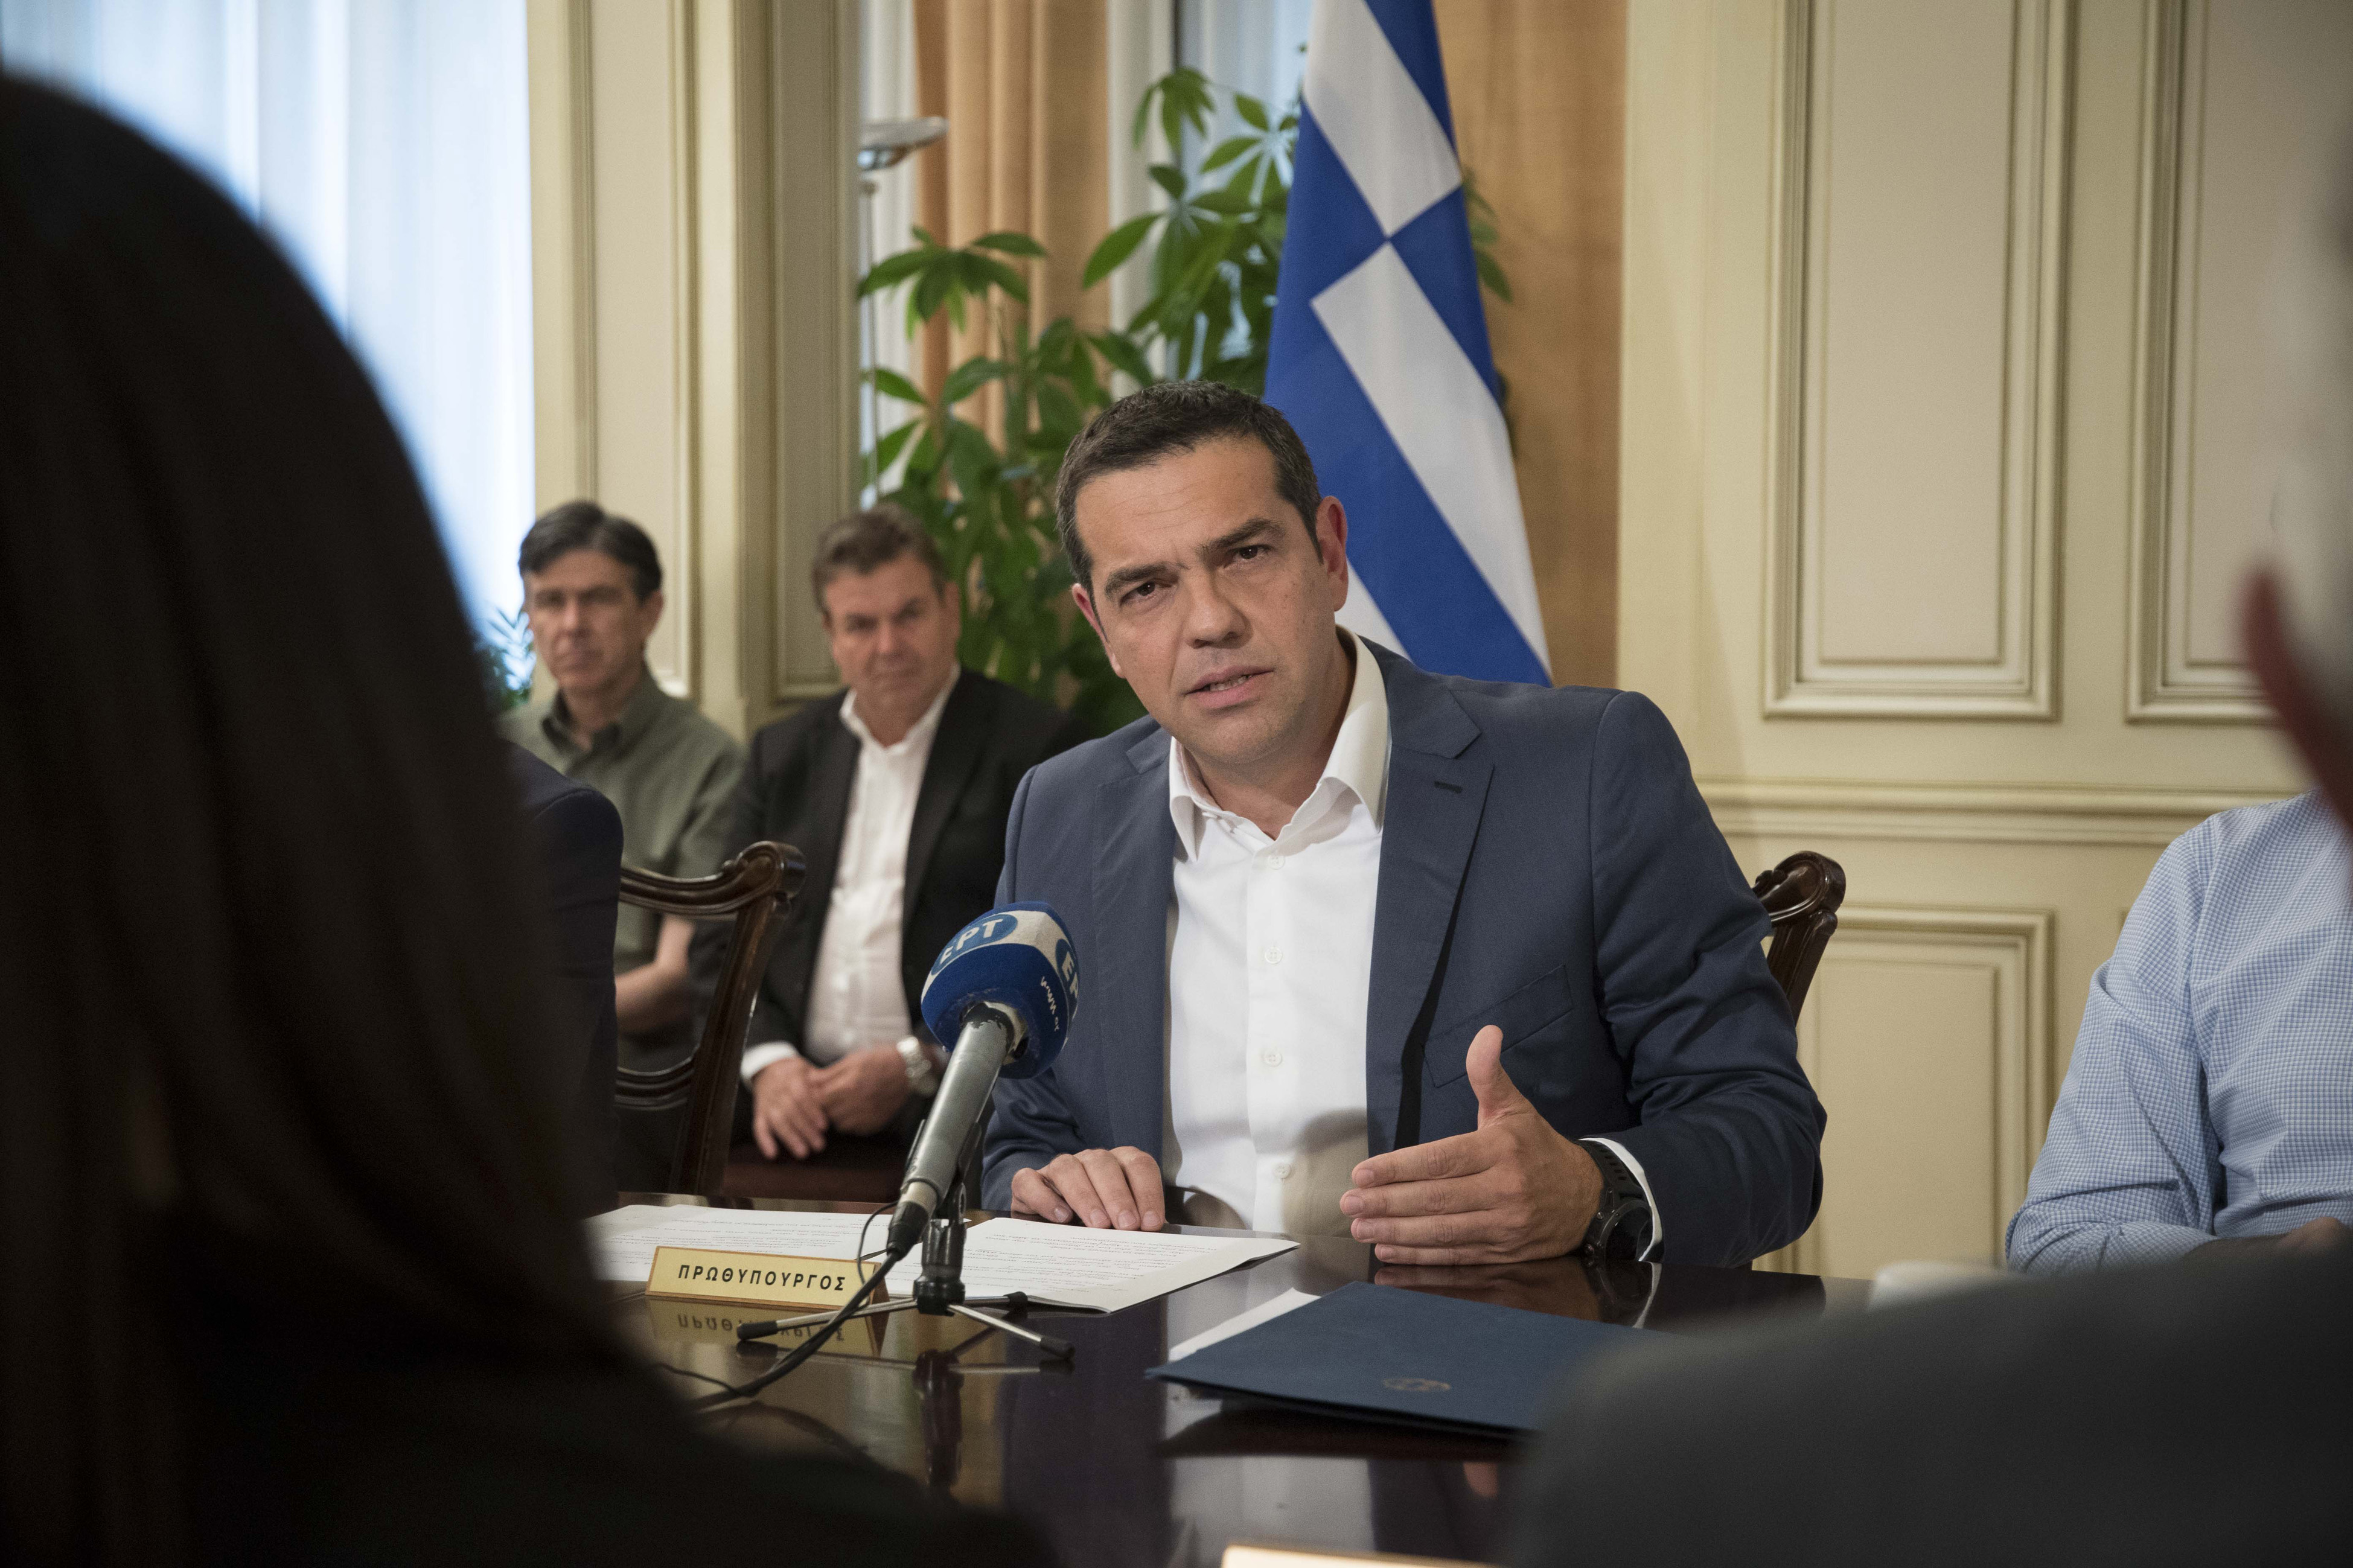 PM’s office lambastes Mitsotakis over his demand for elections